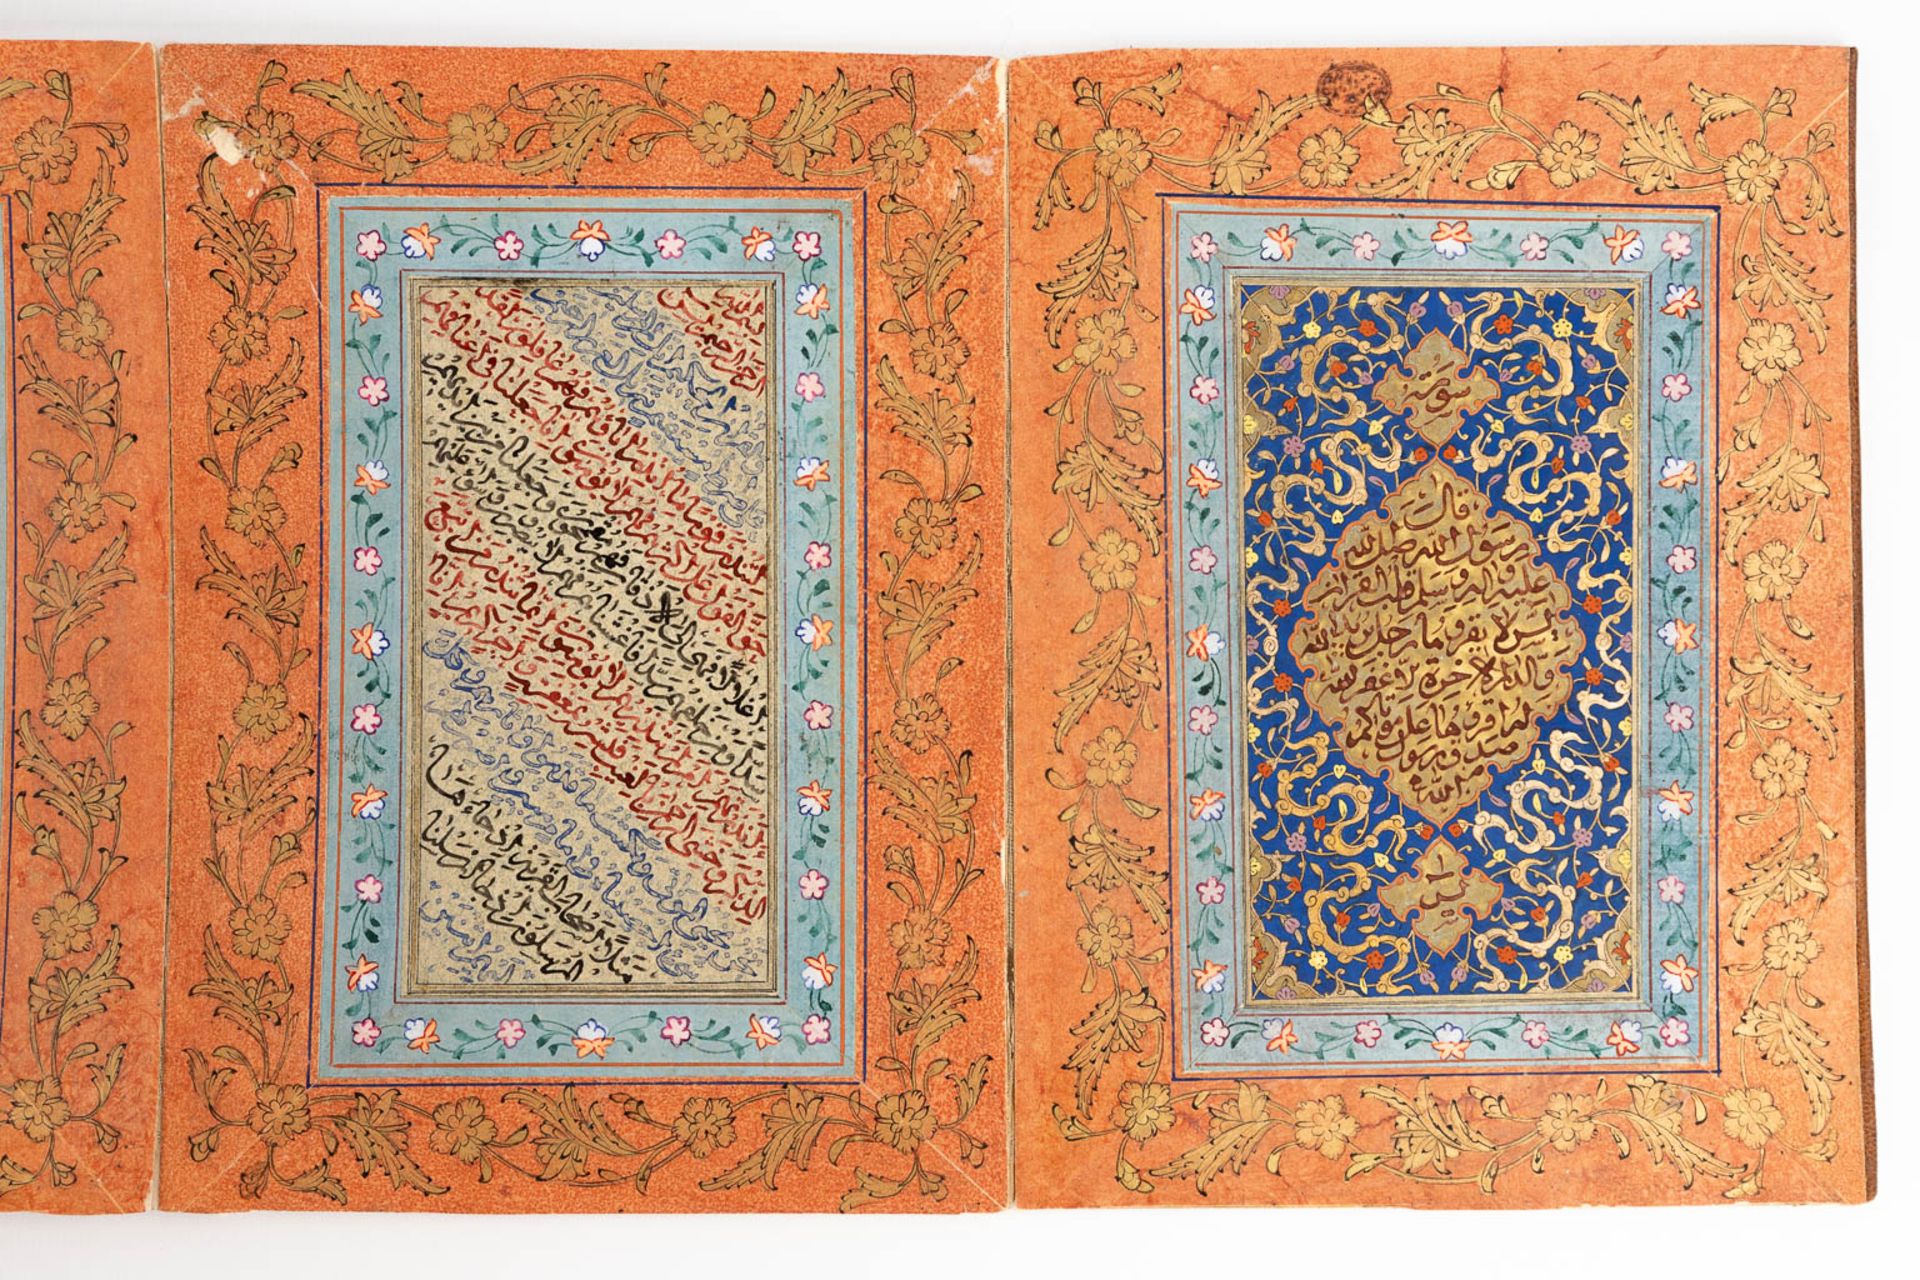 An album of Ottoman Calligraphic Panels (QITA) early 20th C. (W:15 x H:20 cm) - Image 7 of 12